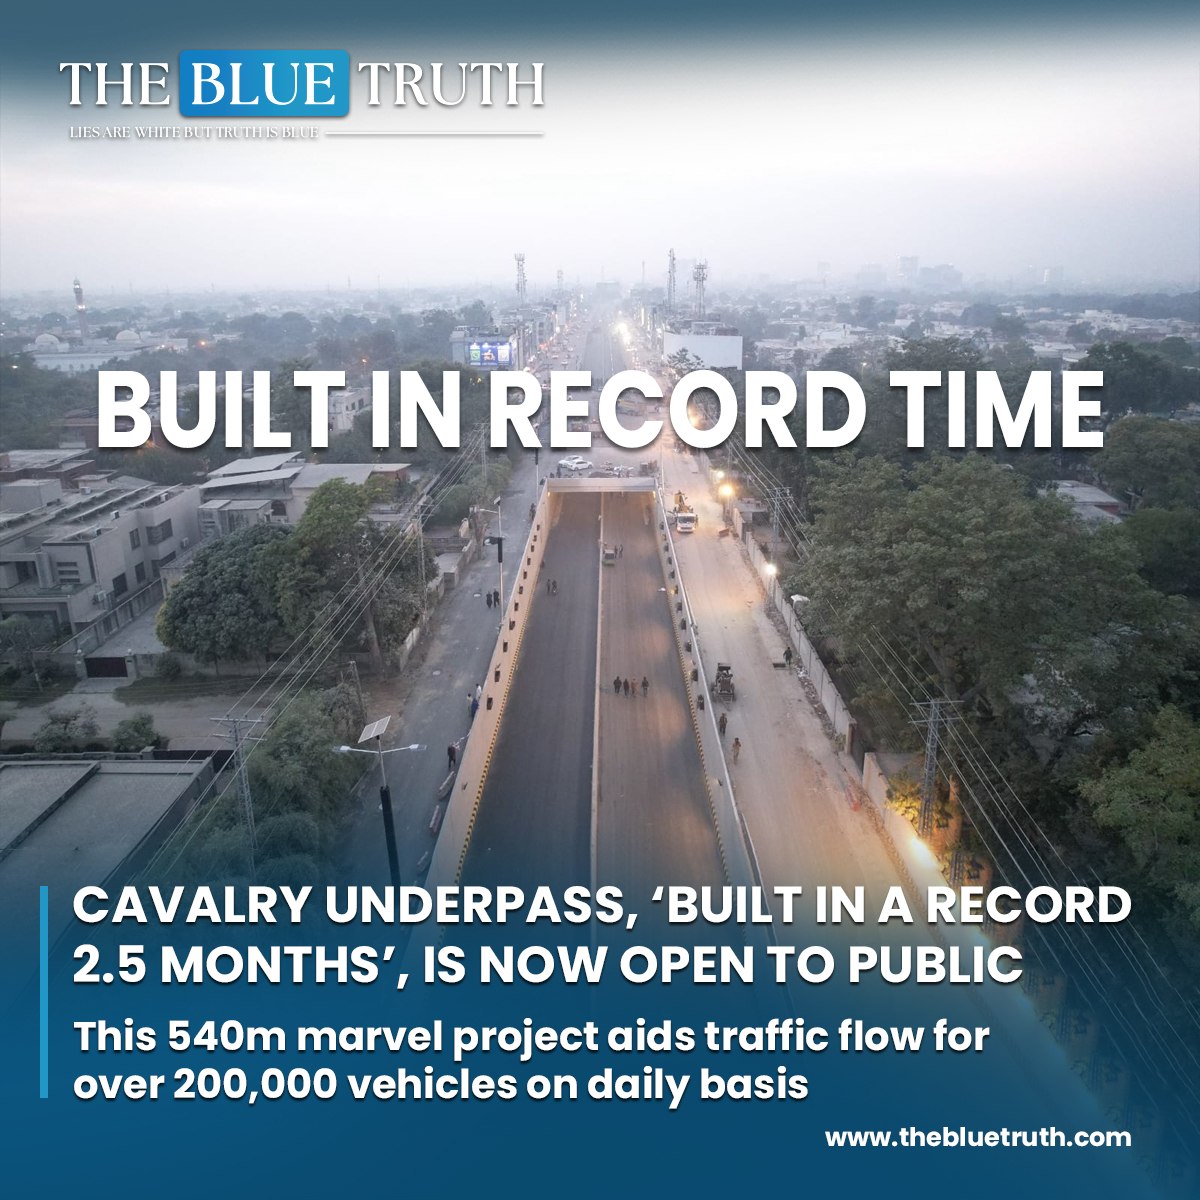 Cavalry Underpass, ‘built in a record 2.5 months’, is now open to public.
This 540m marvel project aids traffic flow for over 200,000 vehicles on daily basis

 #CavalryUnderpass #LahoreDevelopment #TrafficFlow #RecordConstruction #InfrastructureProject #PublicInauguration #TBT